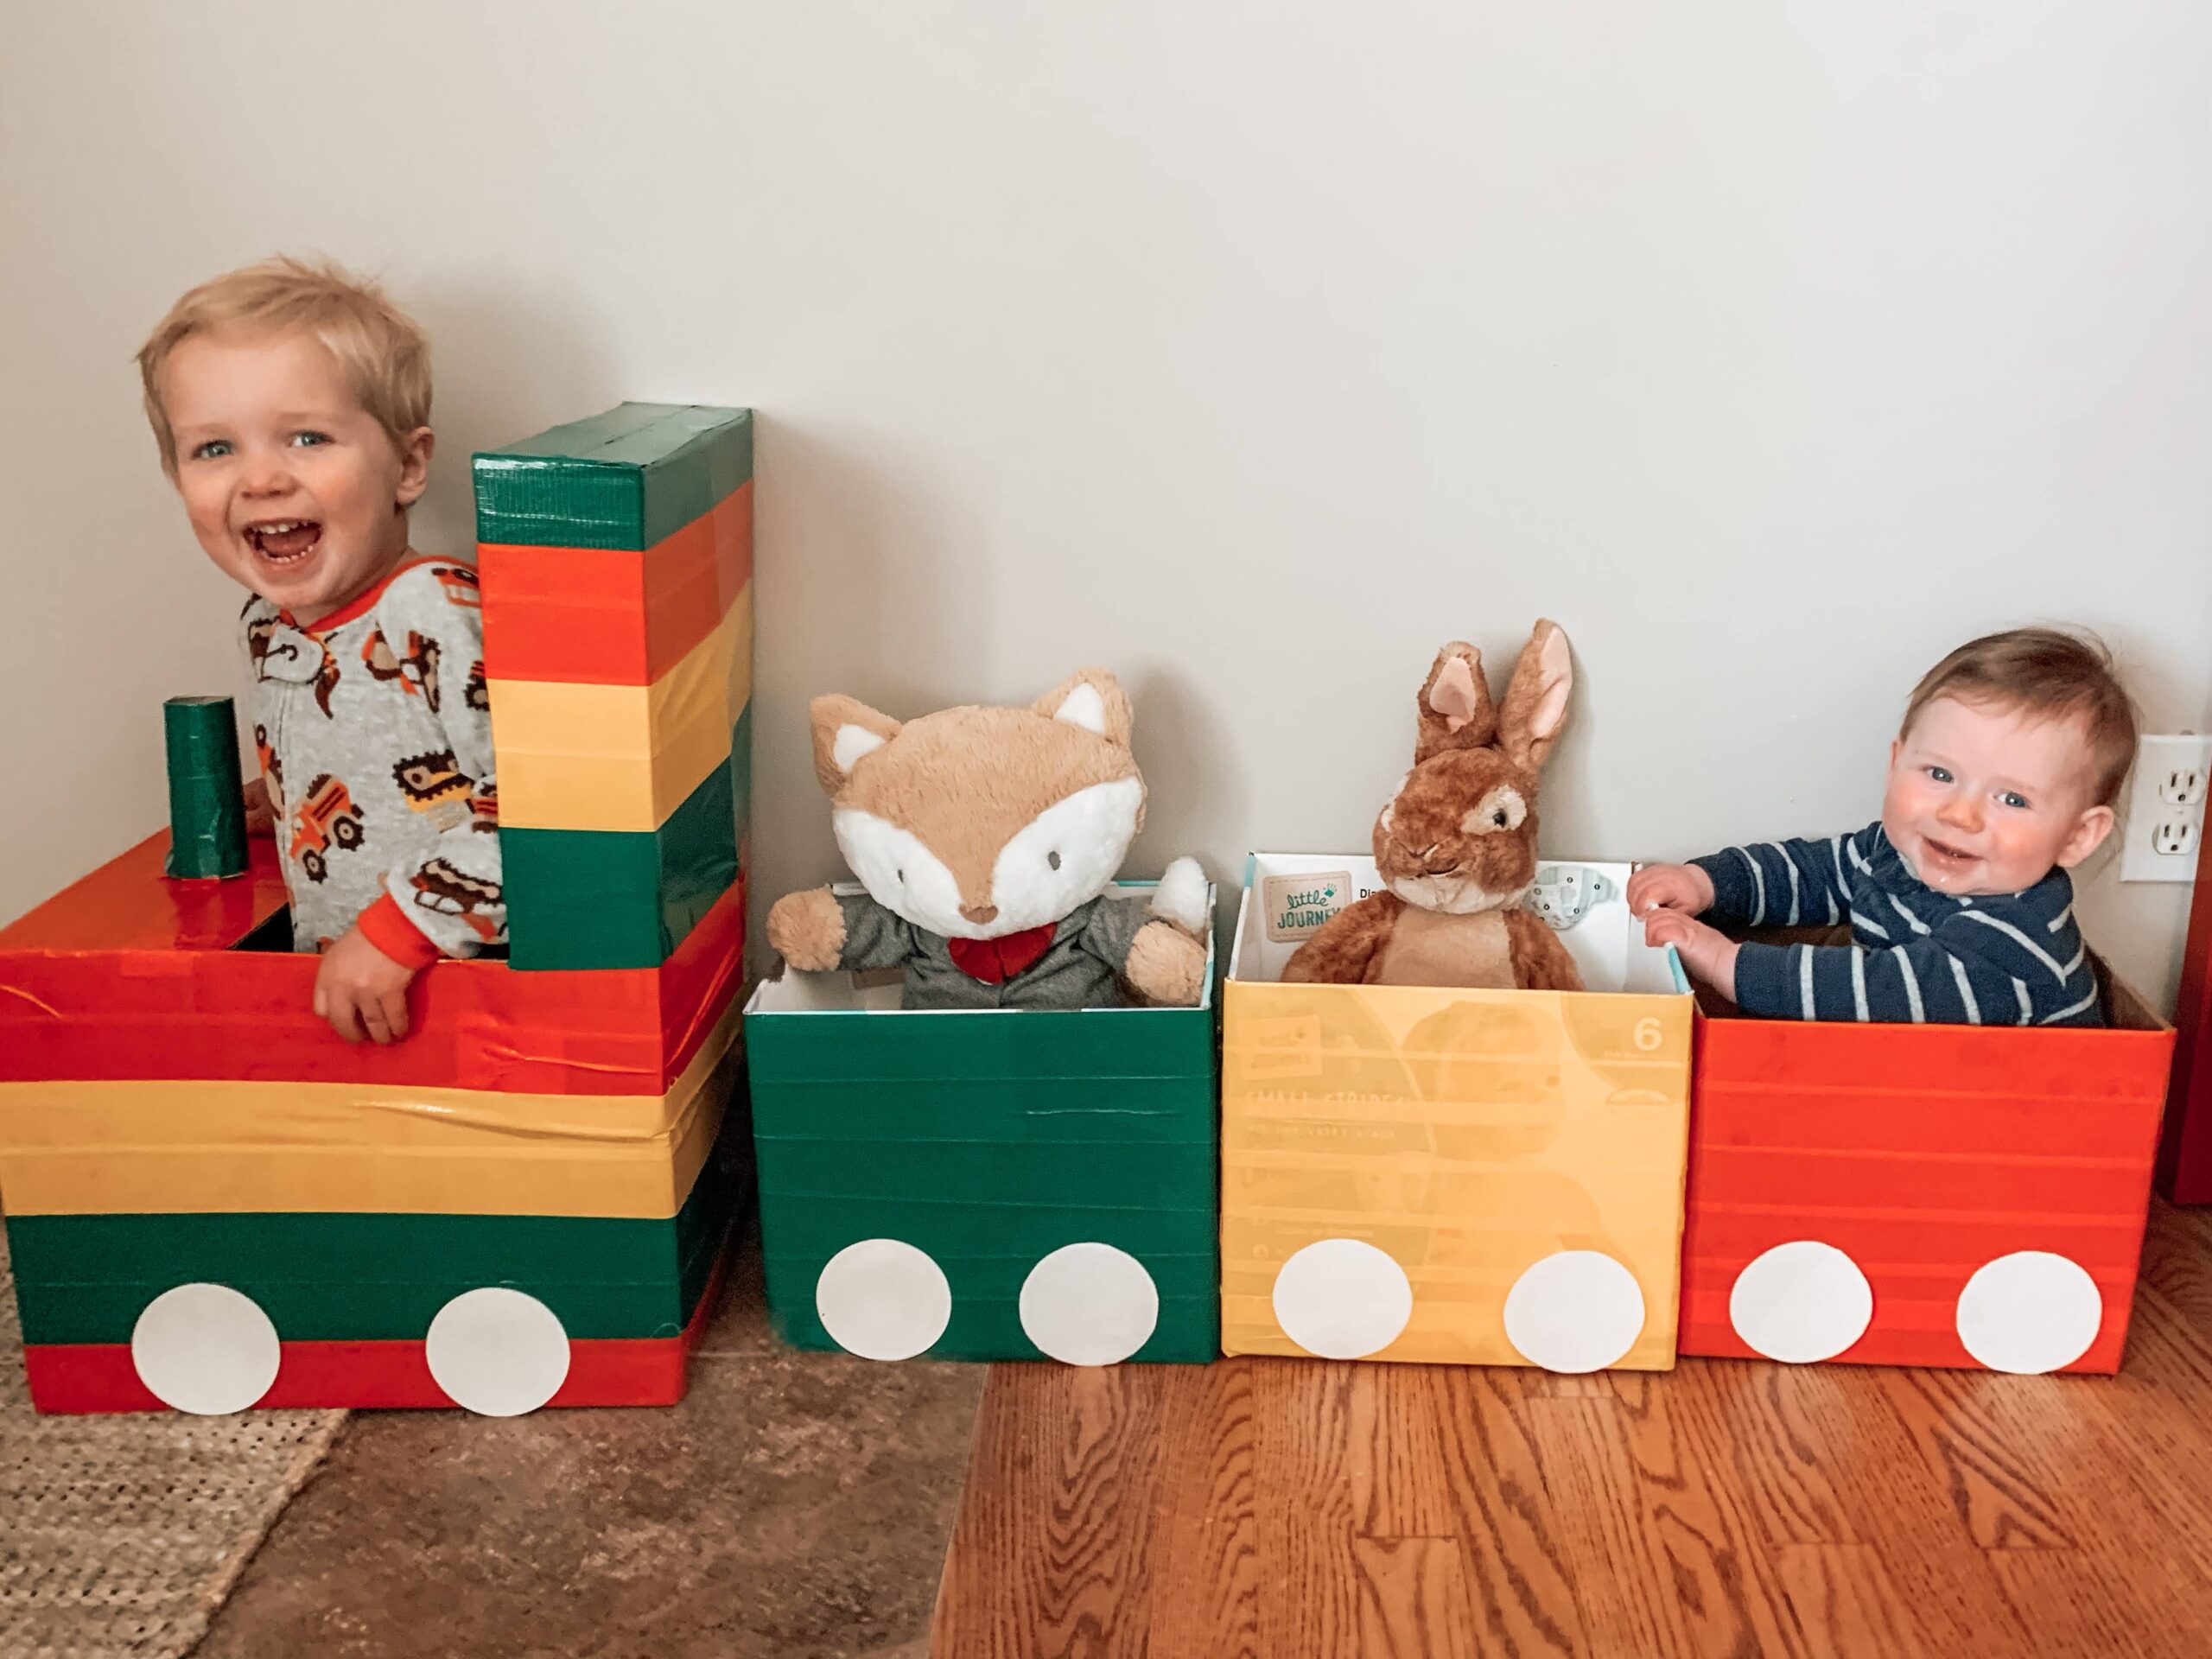 Kids playing with a repourposed cardboard train with stuffed animal and infant smiling enjoying the craft and activity